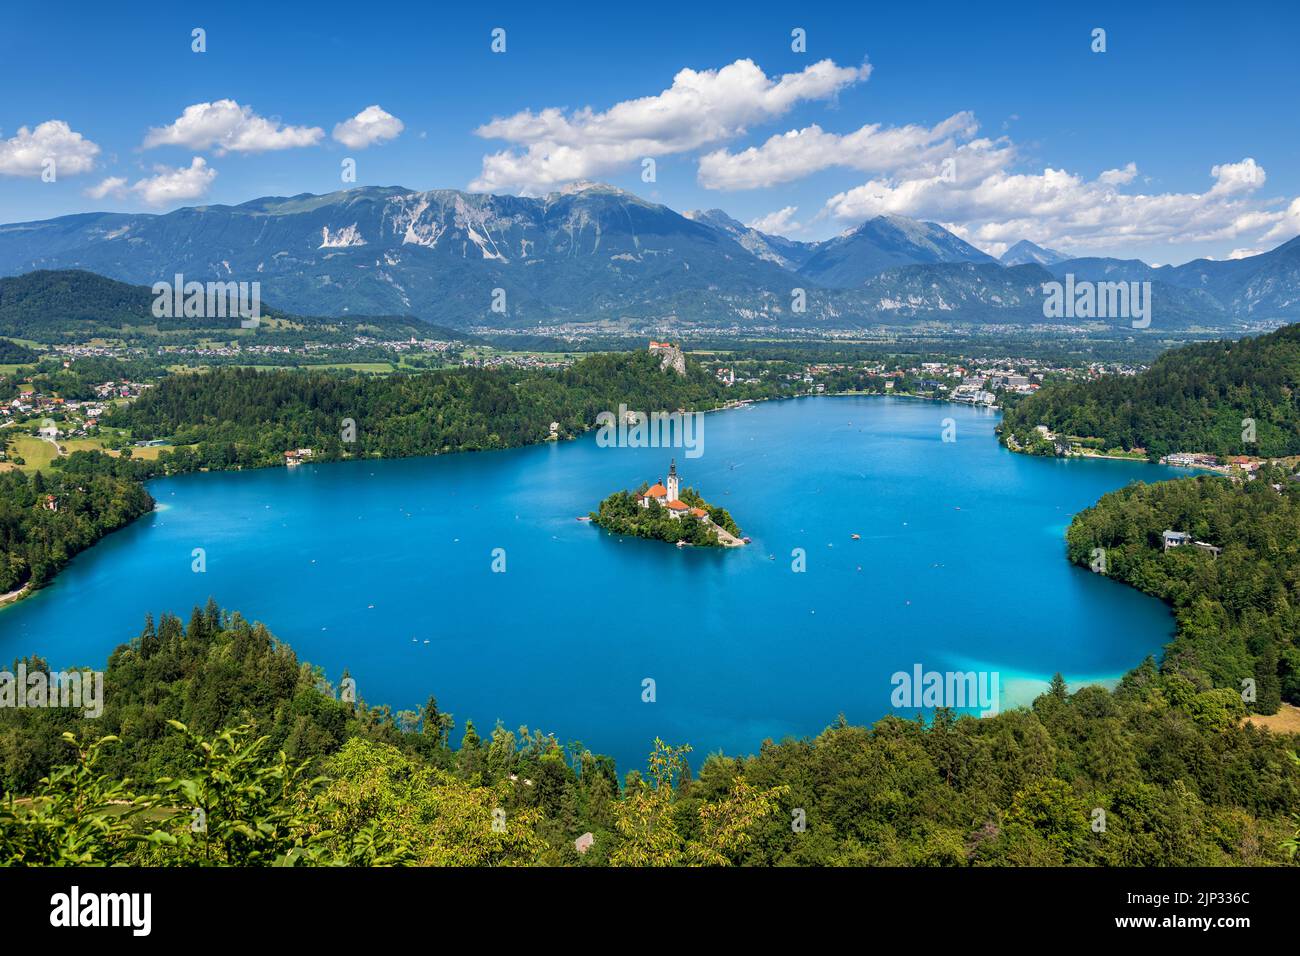 Scenic Lake Bled with an island at the foot of the Julian Alps, northwestern Slovenia. Stock Photo